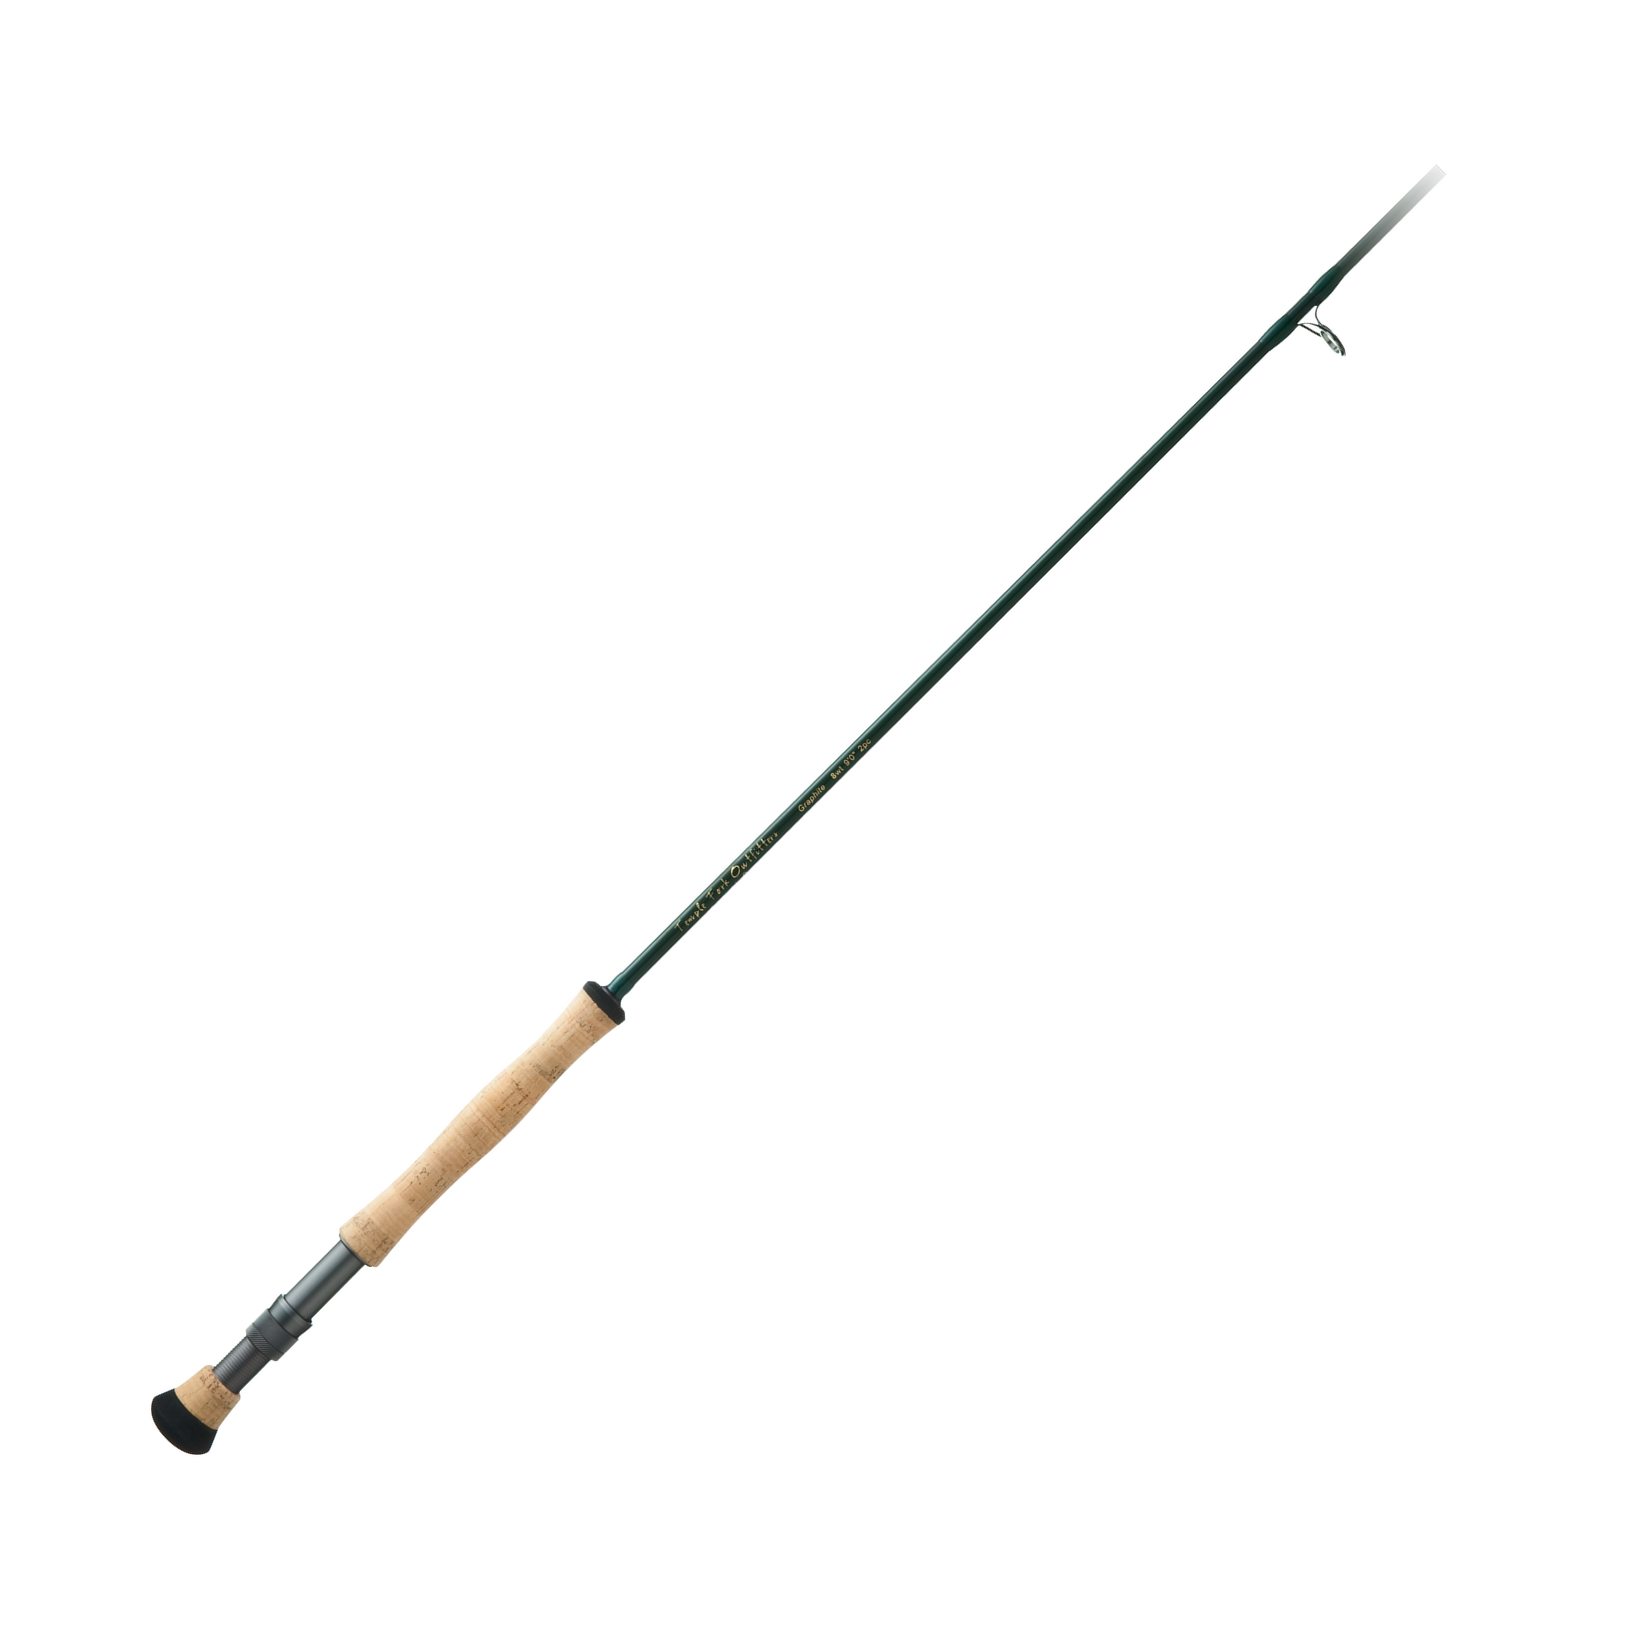 Temple Fork Outfitters Signature II Series Fly Rod - 8' - 4 wt.